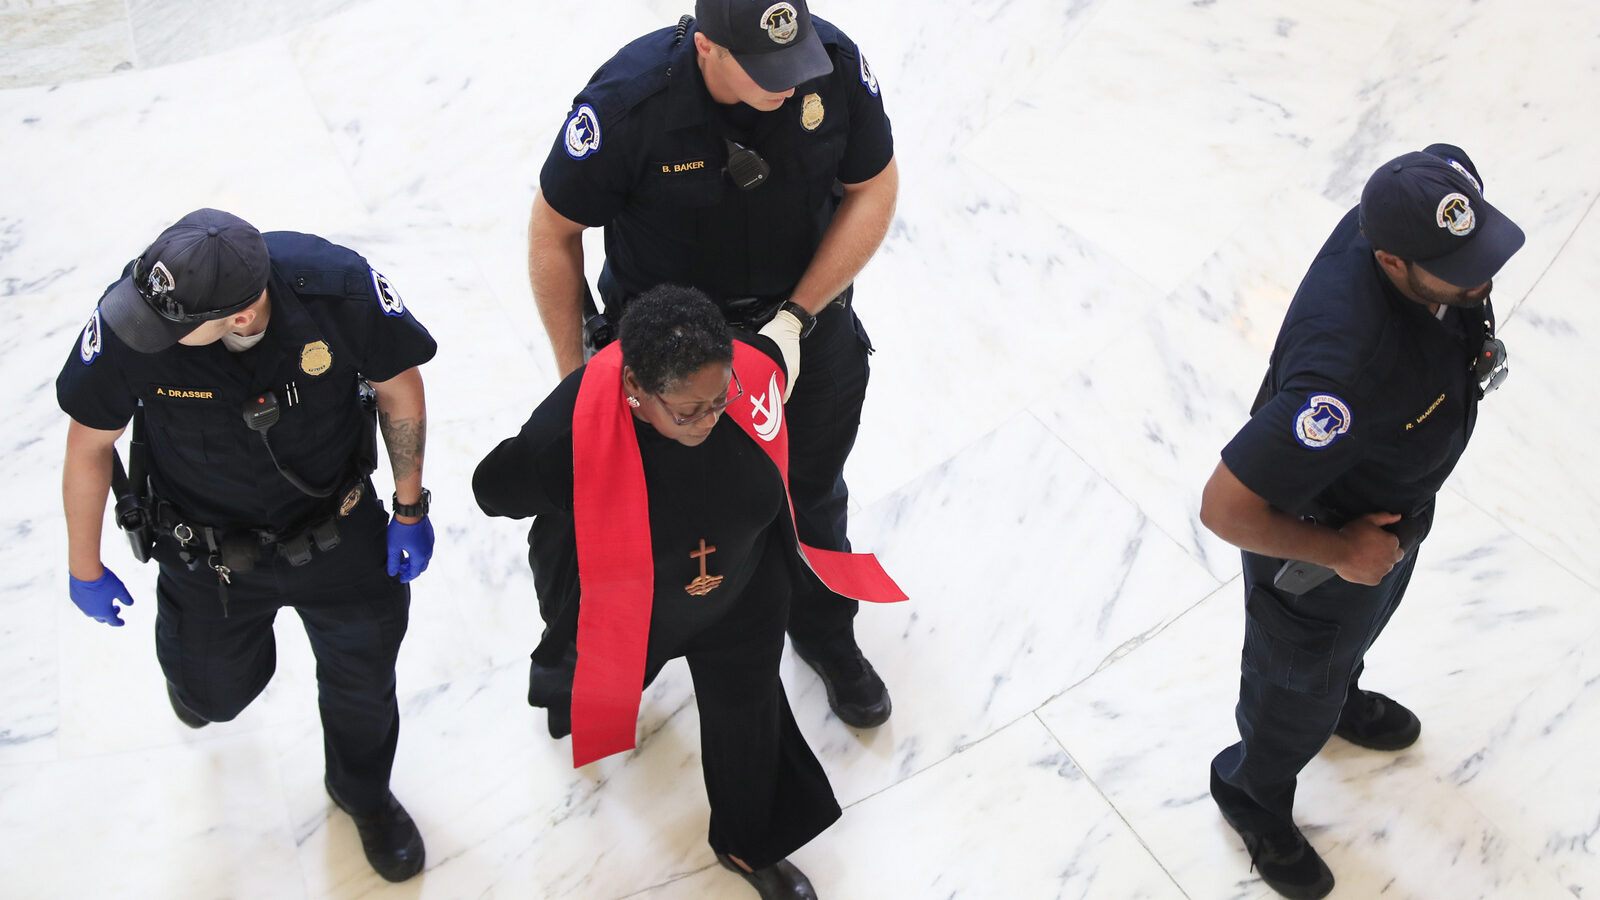 A minister belonging to a group protesting the Trump administration's budget proposals and health care bill, is arrested during in the Russell Senate Building on Capitol Hill in Washington, July 18, 2017. (AP/Manuel Balce Ceneta)